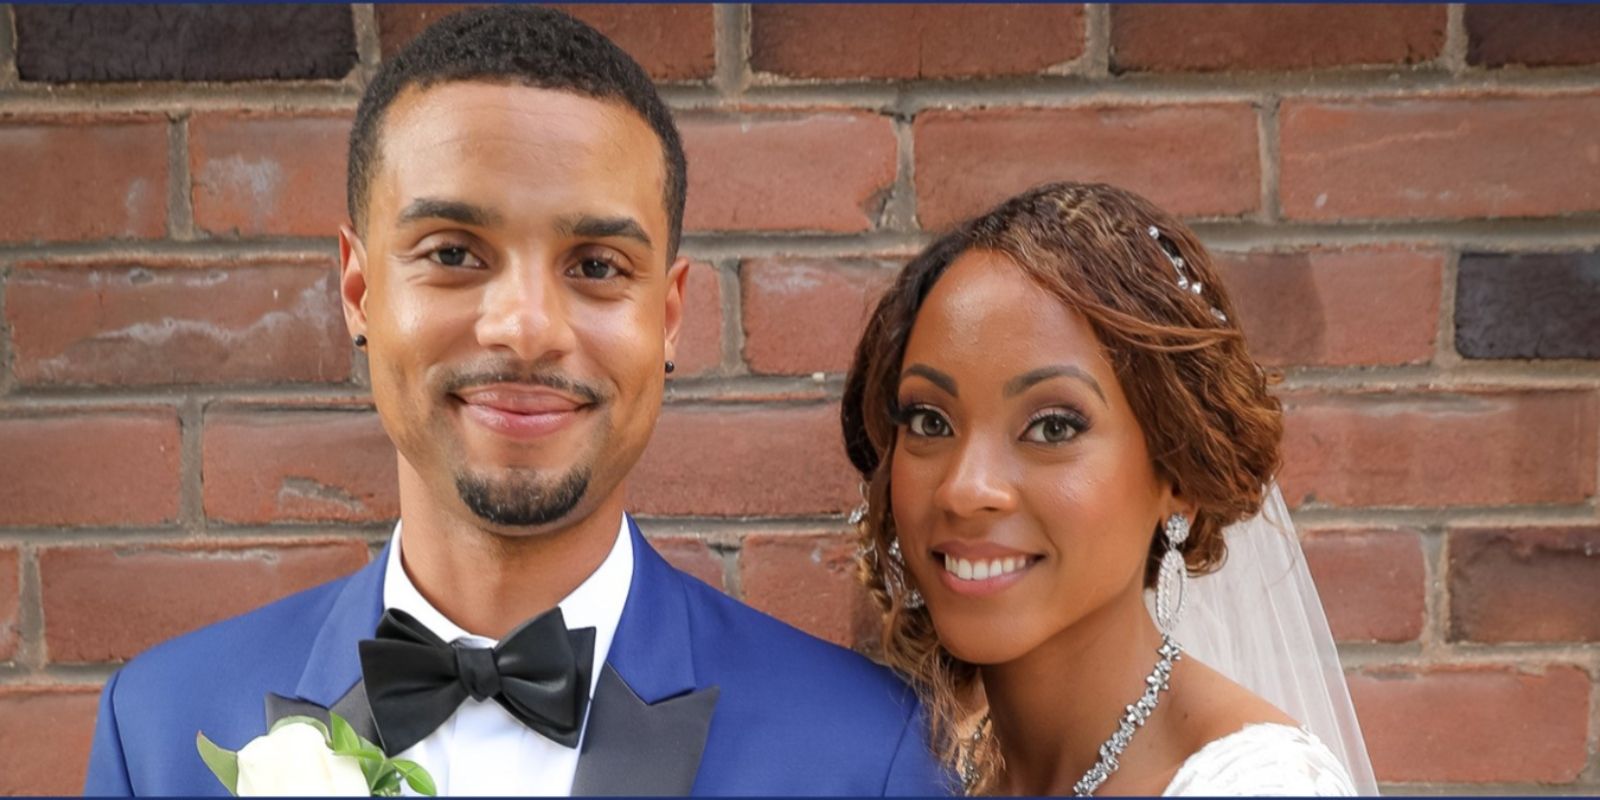 Brandon Taylor Married At First Sight wedding day